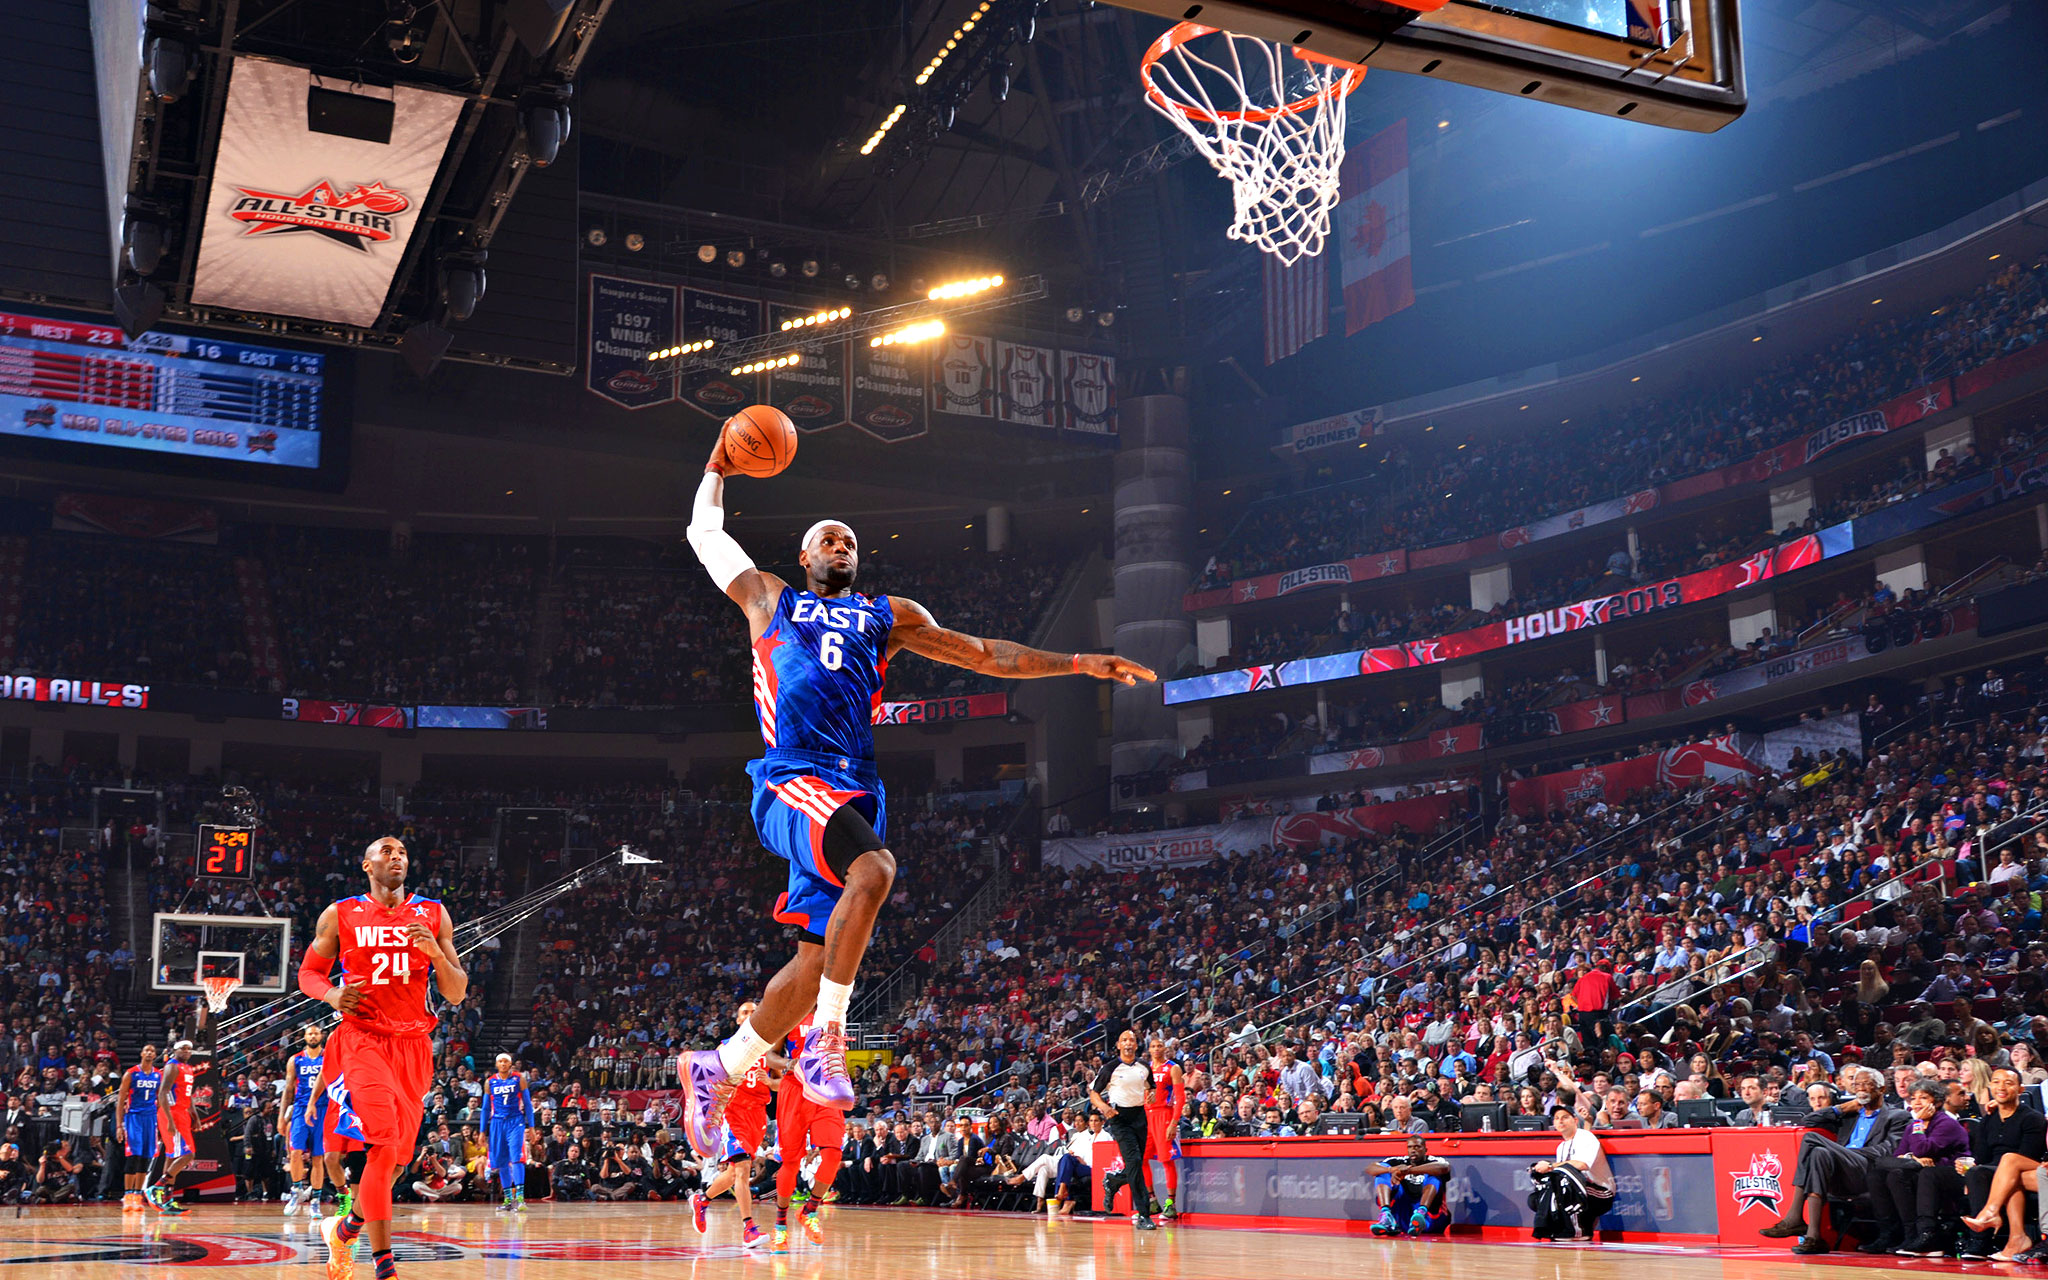 LeBron with the monster breakaway dunk at the 2013 All-Star Game with Kobe trailing ...